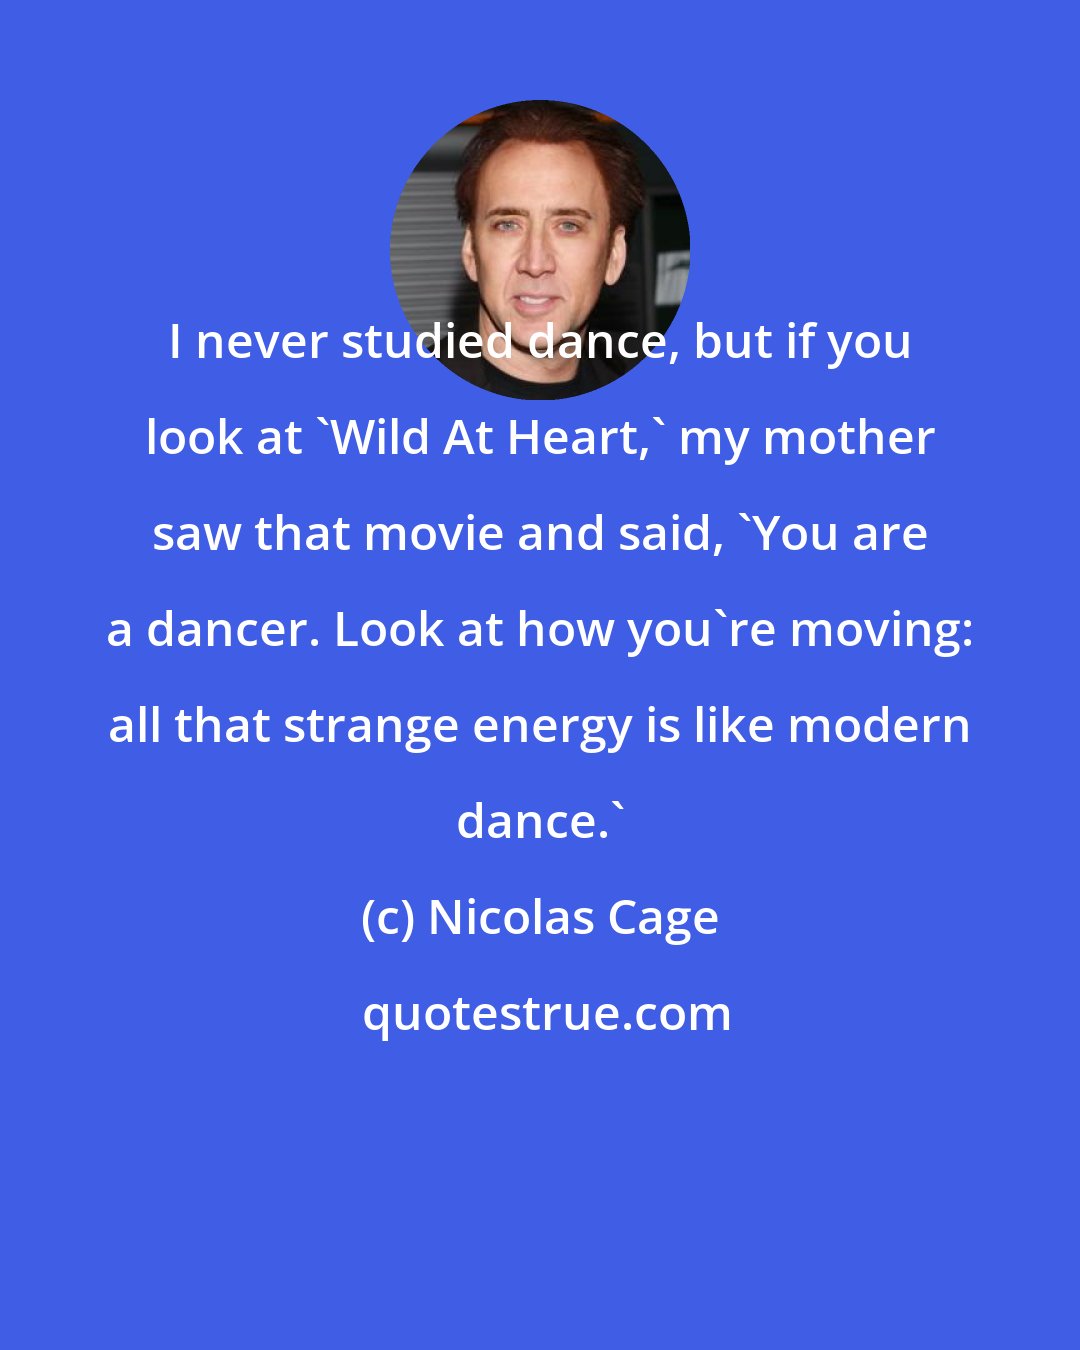 Nicolas Cage: I never studied dance, but if you look at 'Wild At Heart,' my mother saw that movie and said, 'You are a dancer. Look at how you're moving: all that strange energy is like modern dance.'